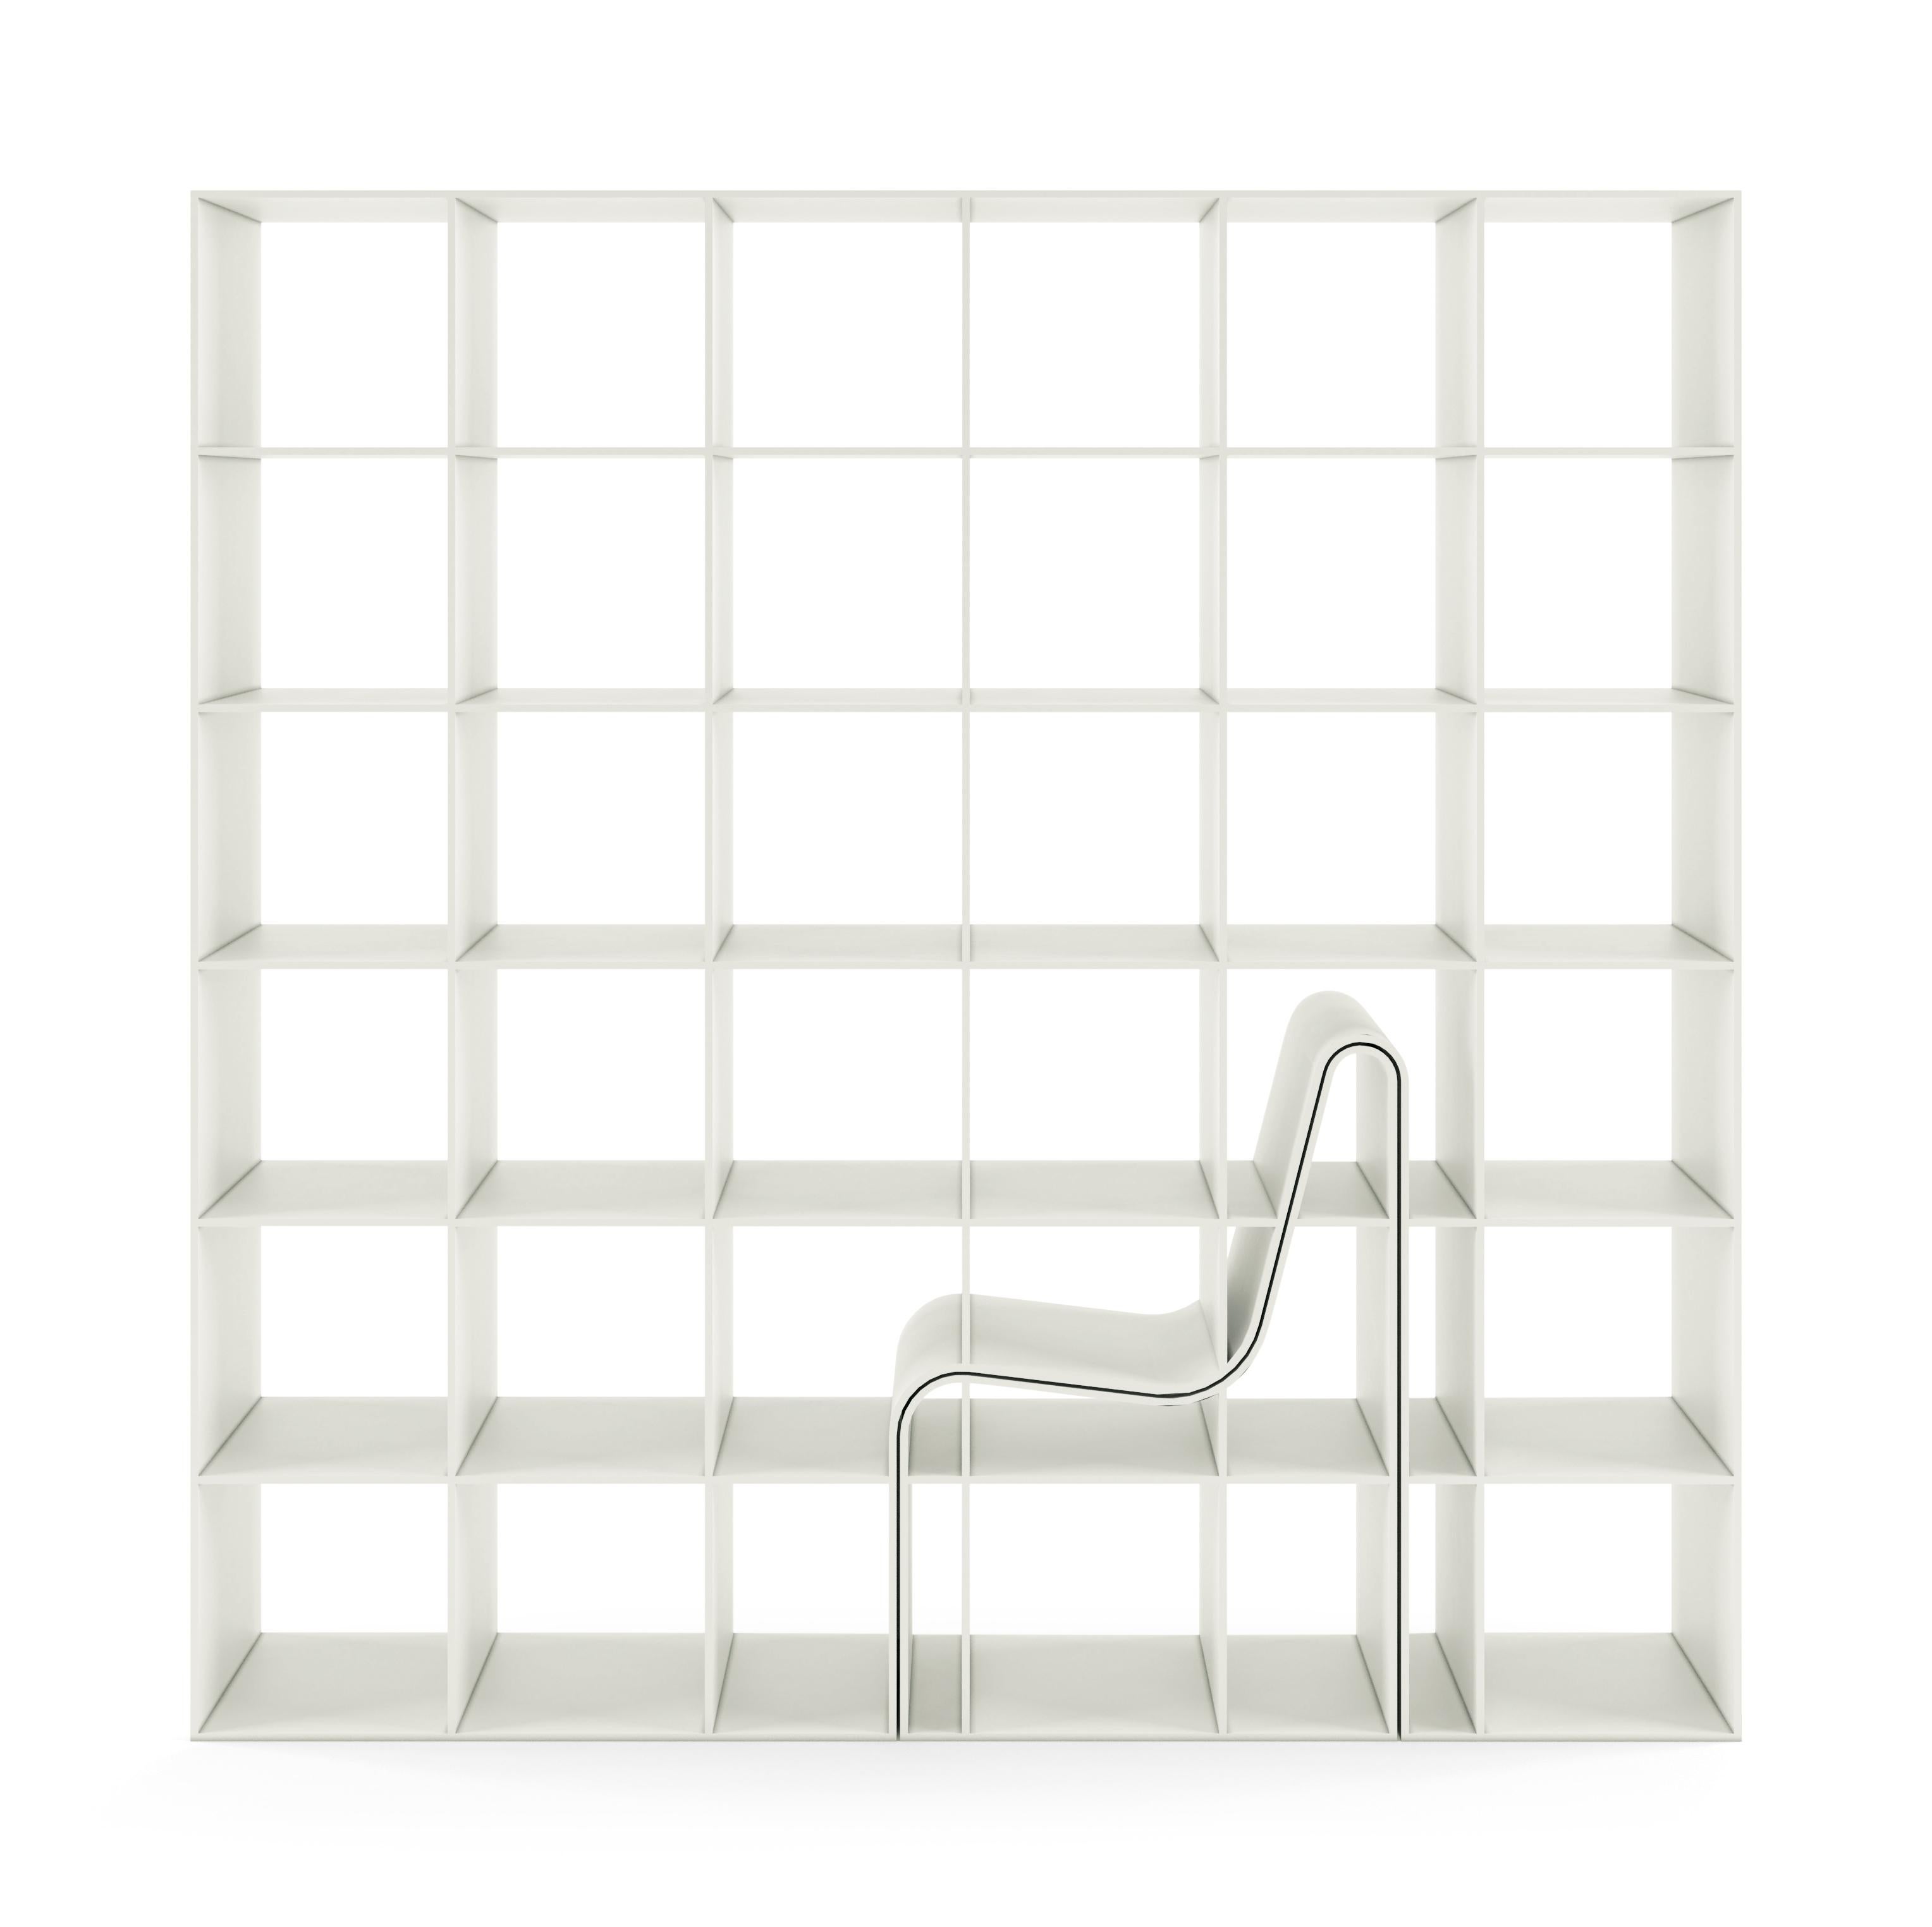 Alias 210 Bookchair Bookcase with Chair in White Lacquered MDF by Sou Fujimoto

Bookcase with structure and tops made of white (V001) lacquered MDF. Extractable seat in the same finish.

One of the best-known Japanese architects today, Sou